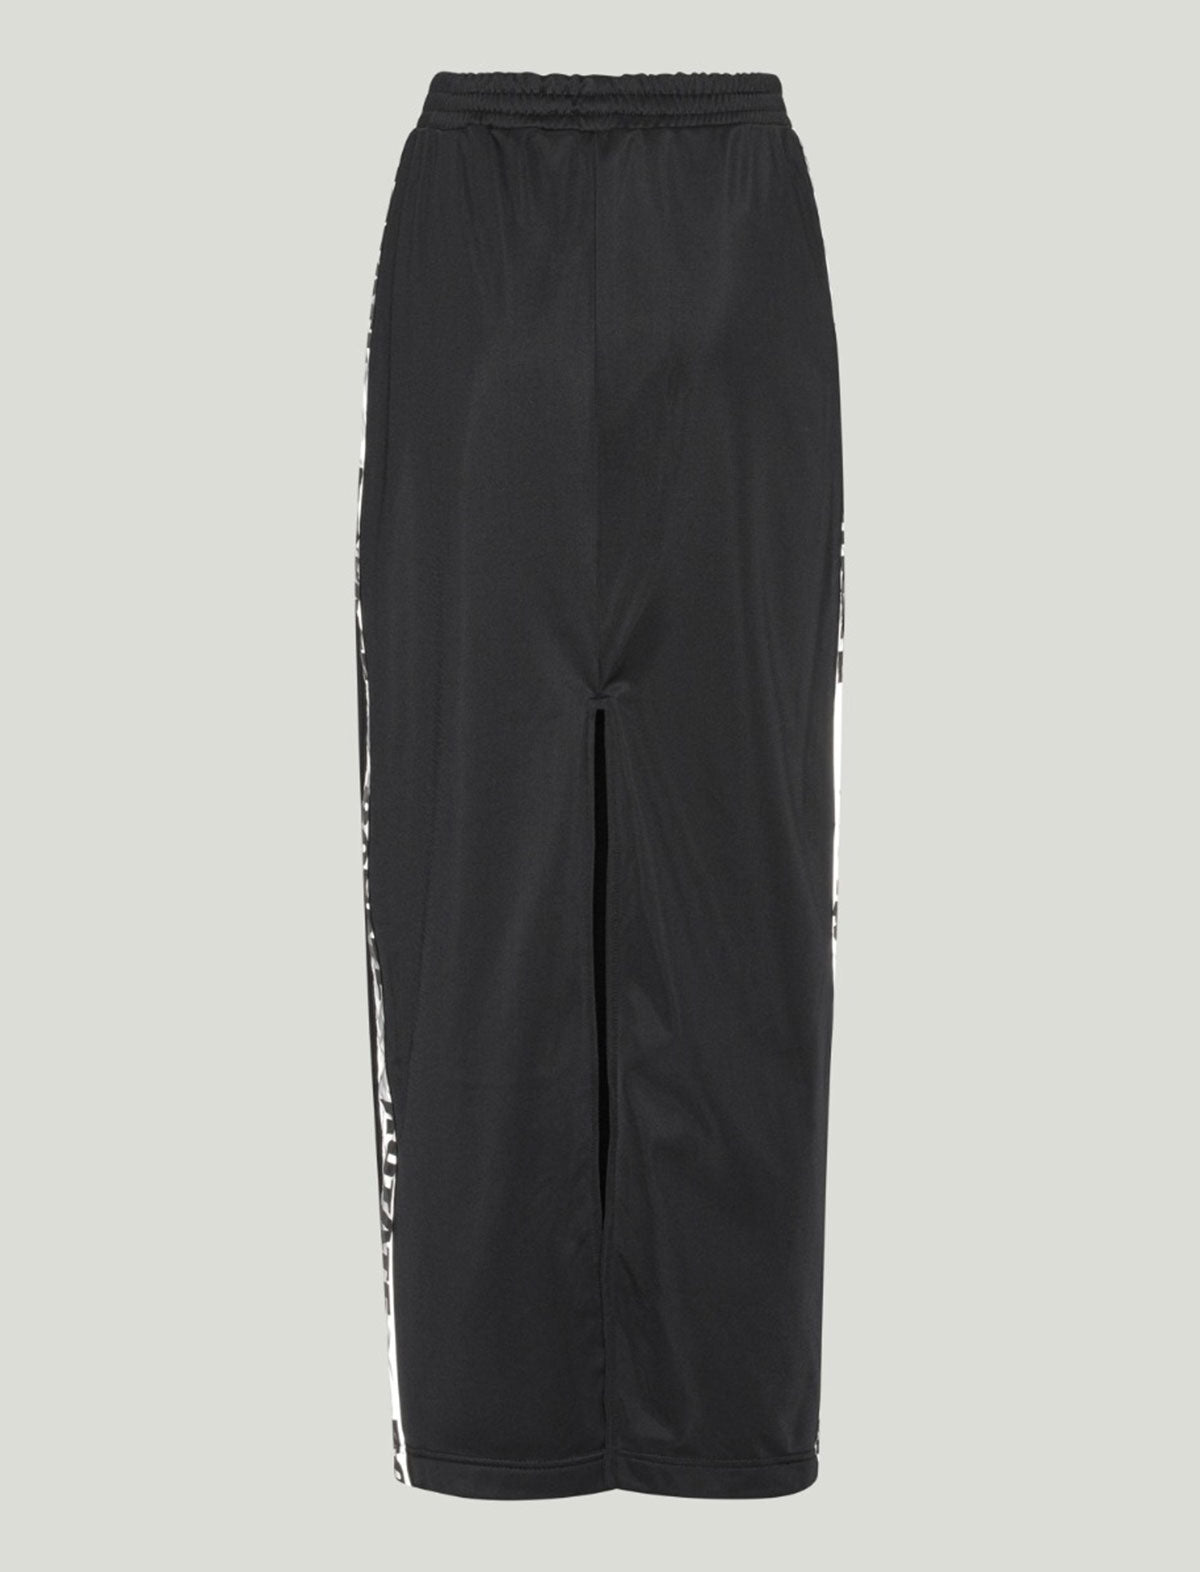 ROTATE SUNDAY 6 Sporty Stretch Maxi Skirt in Black